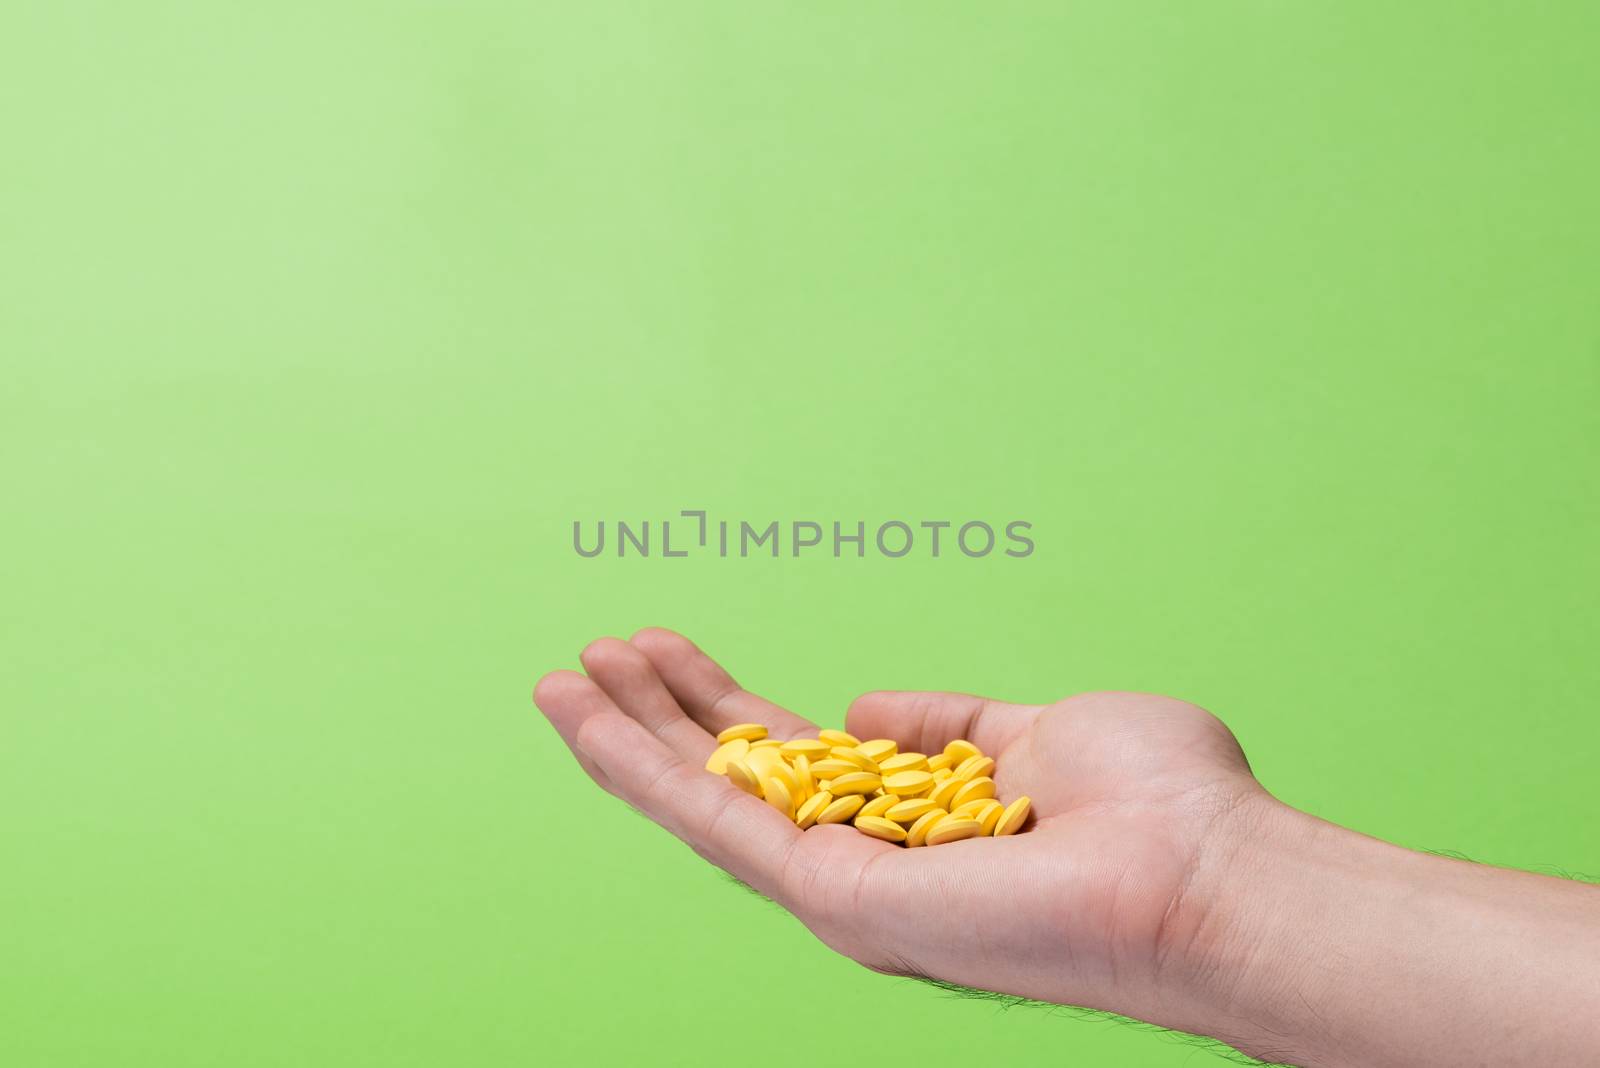 Yellow pills in hand on green background.